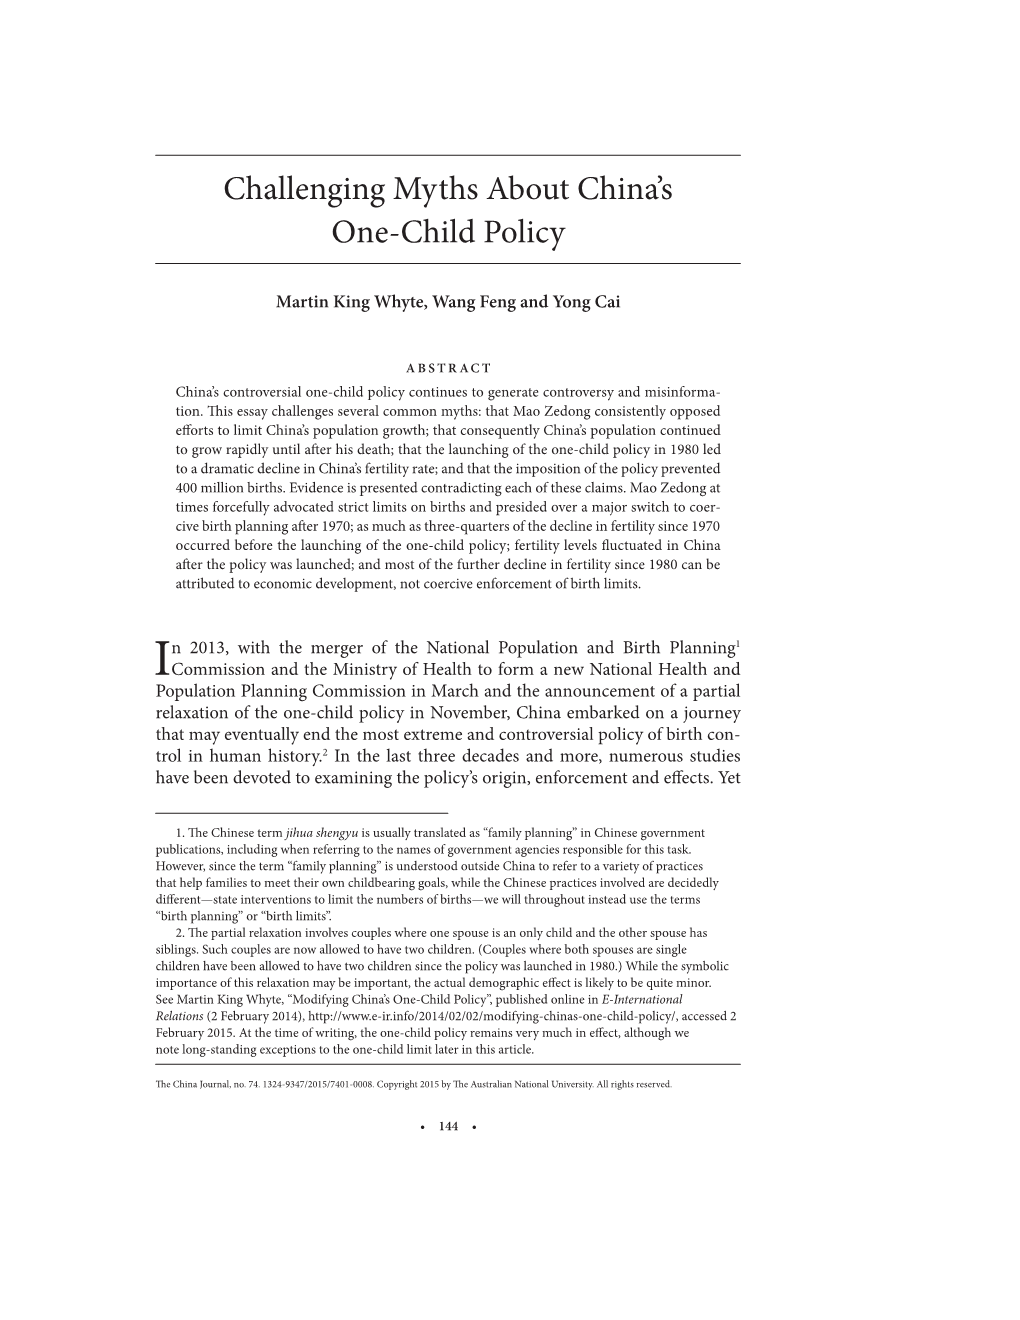 Challenging Myths About China's One-Child Policy